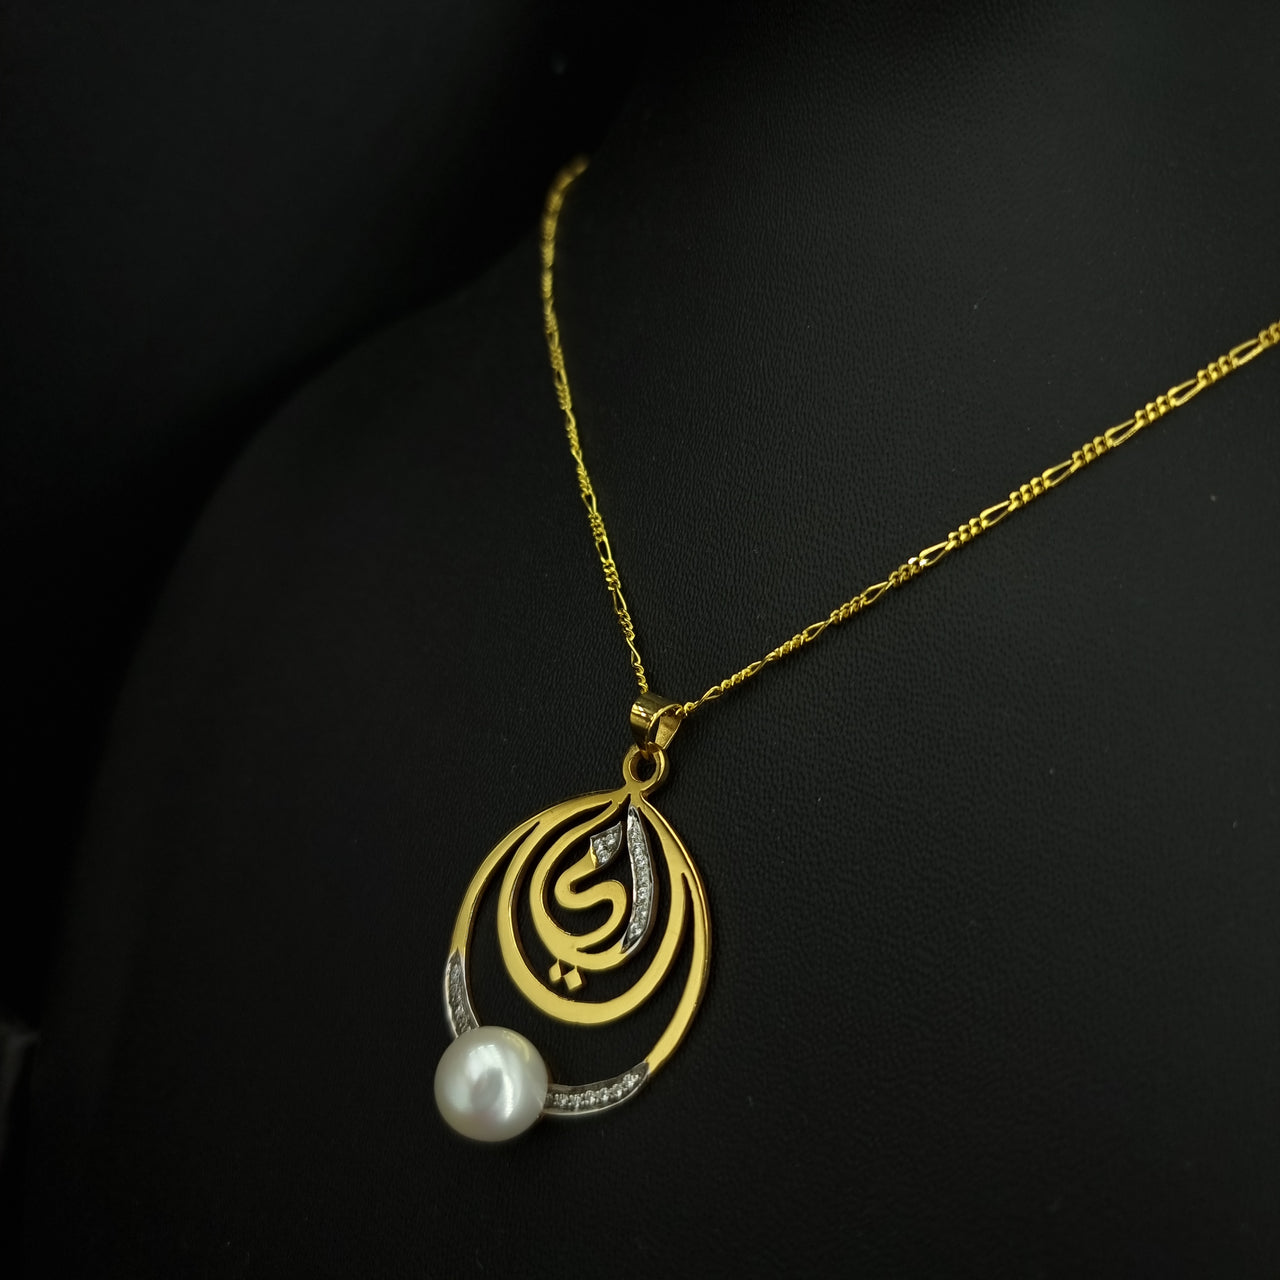 Mum (امي) Freshwater Pearl Necklace